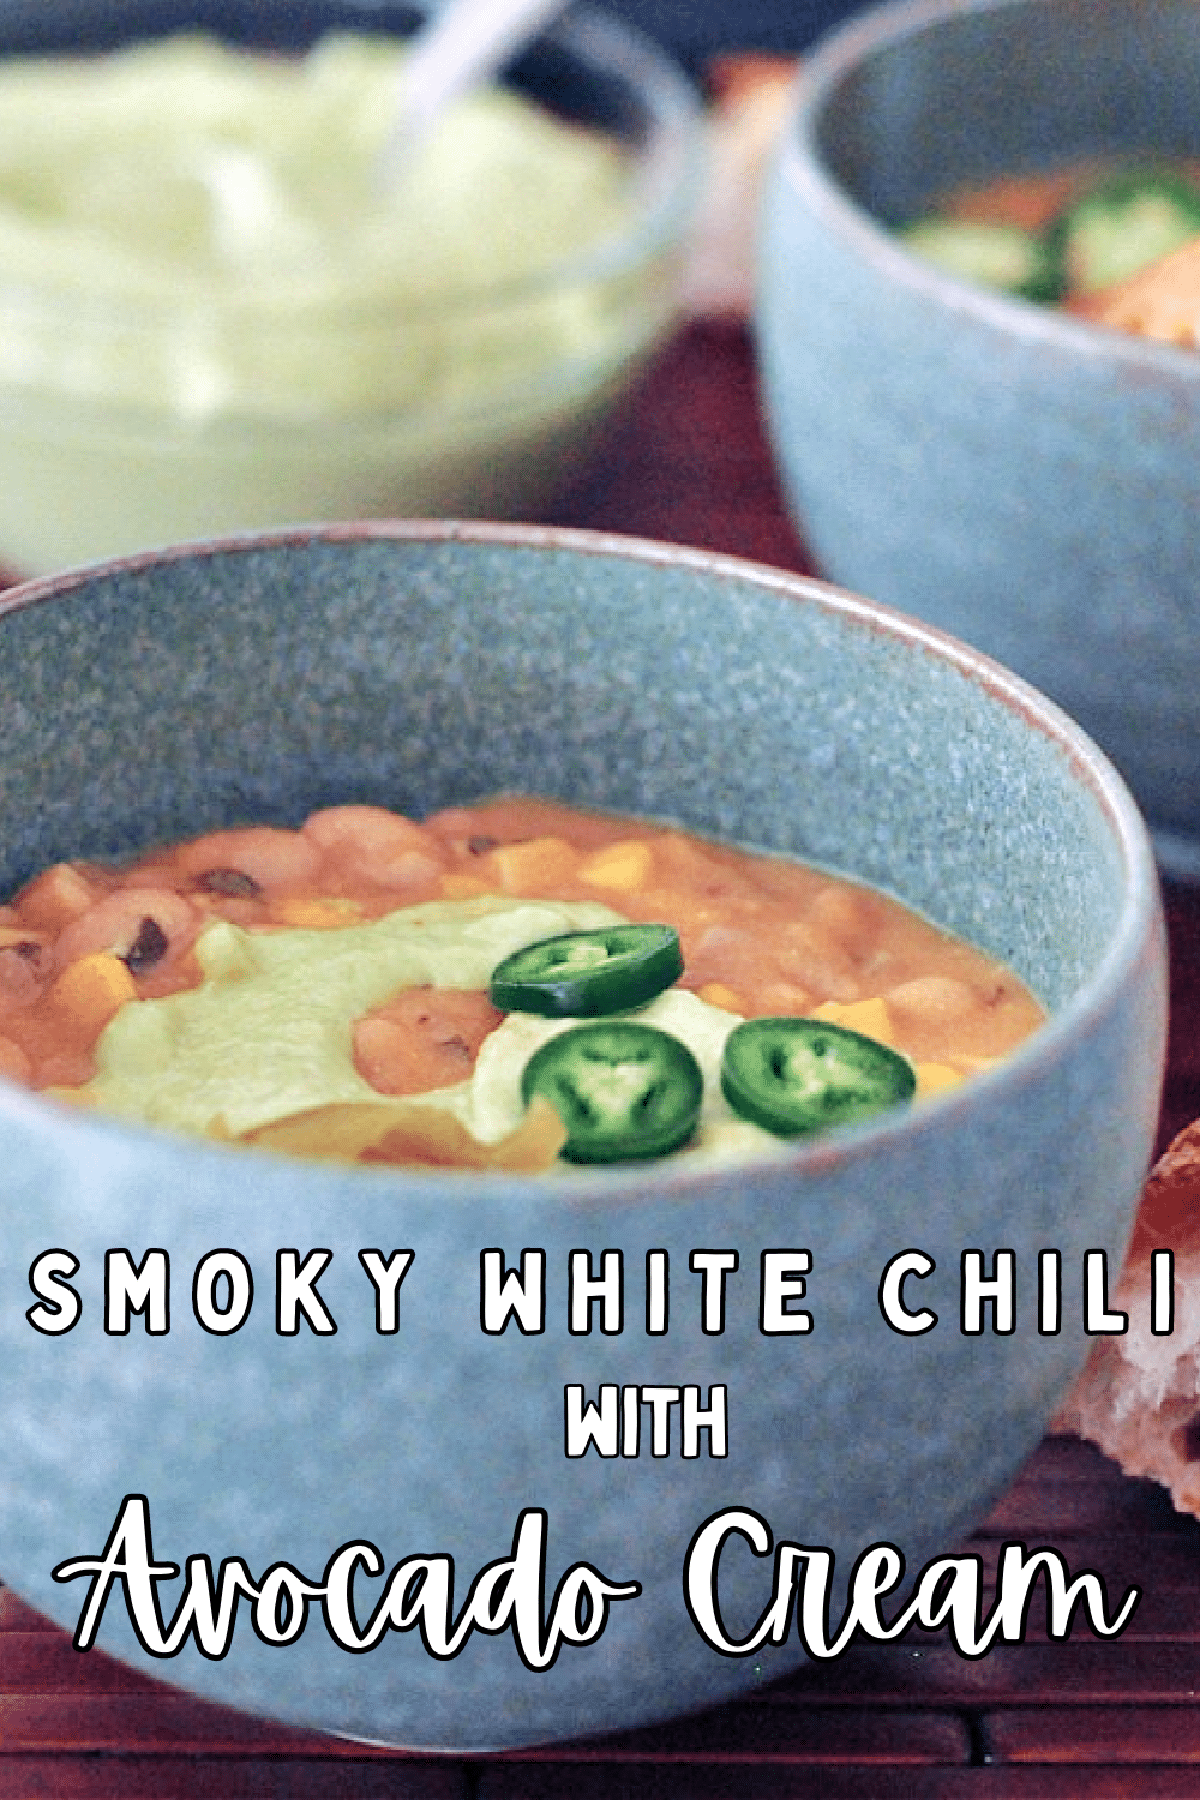 White bean chili in a grey bowl, garnished with light green Hatch avocado cream and sliced jalapeno peppers.